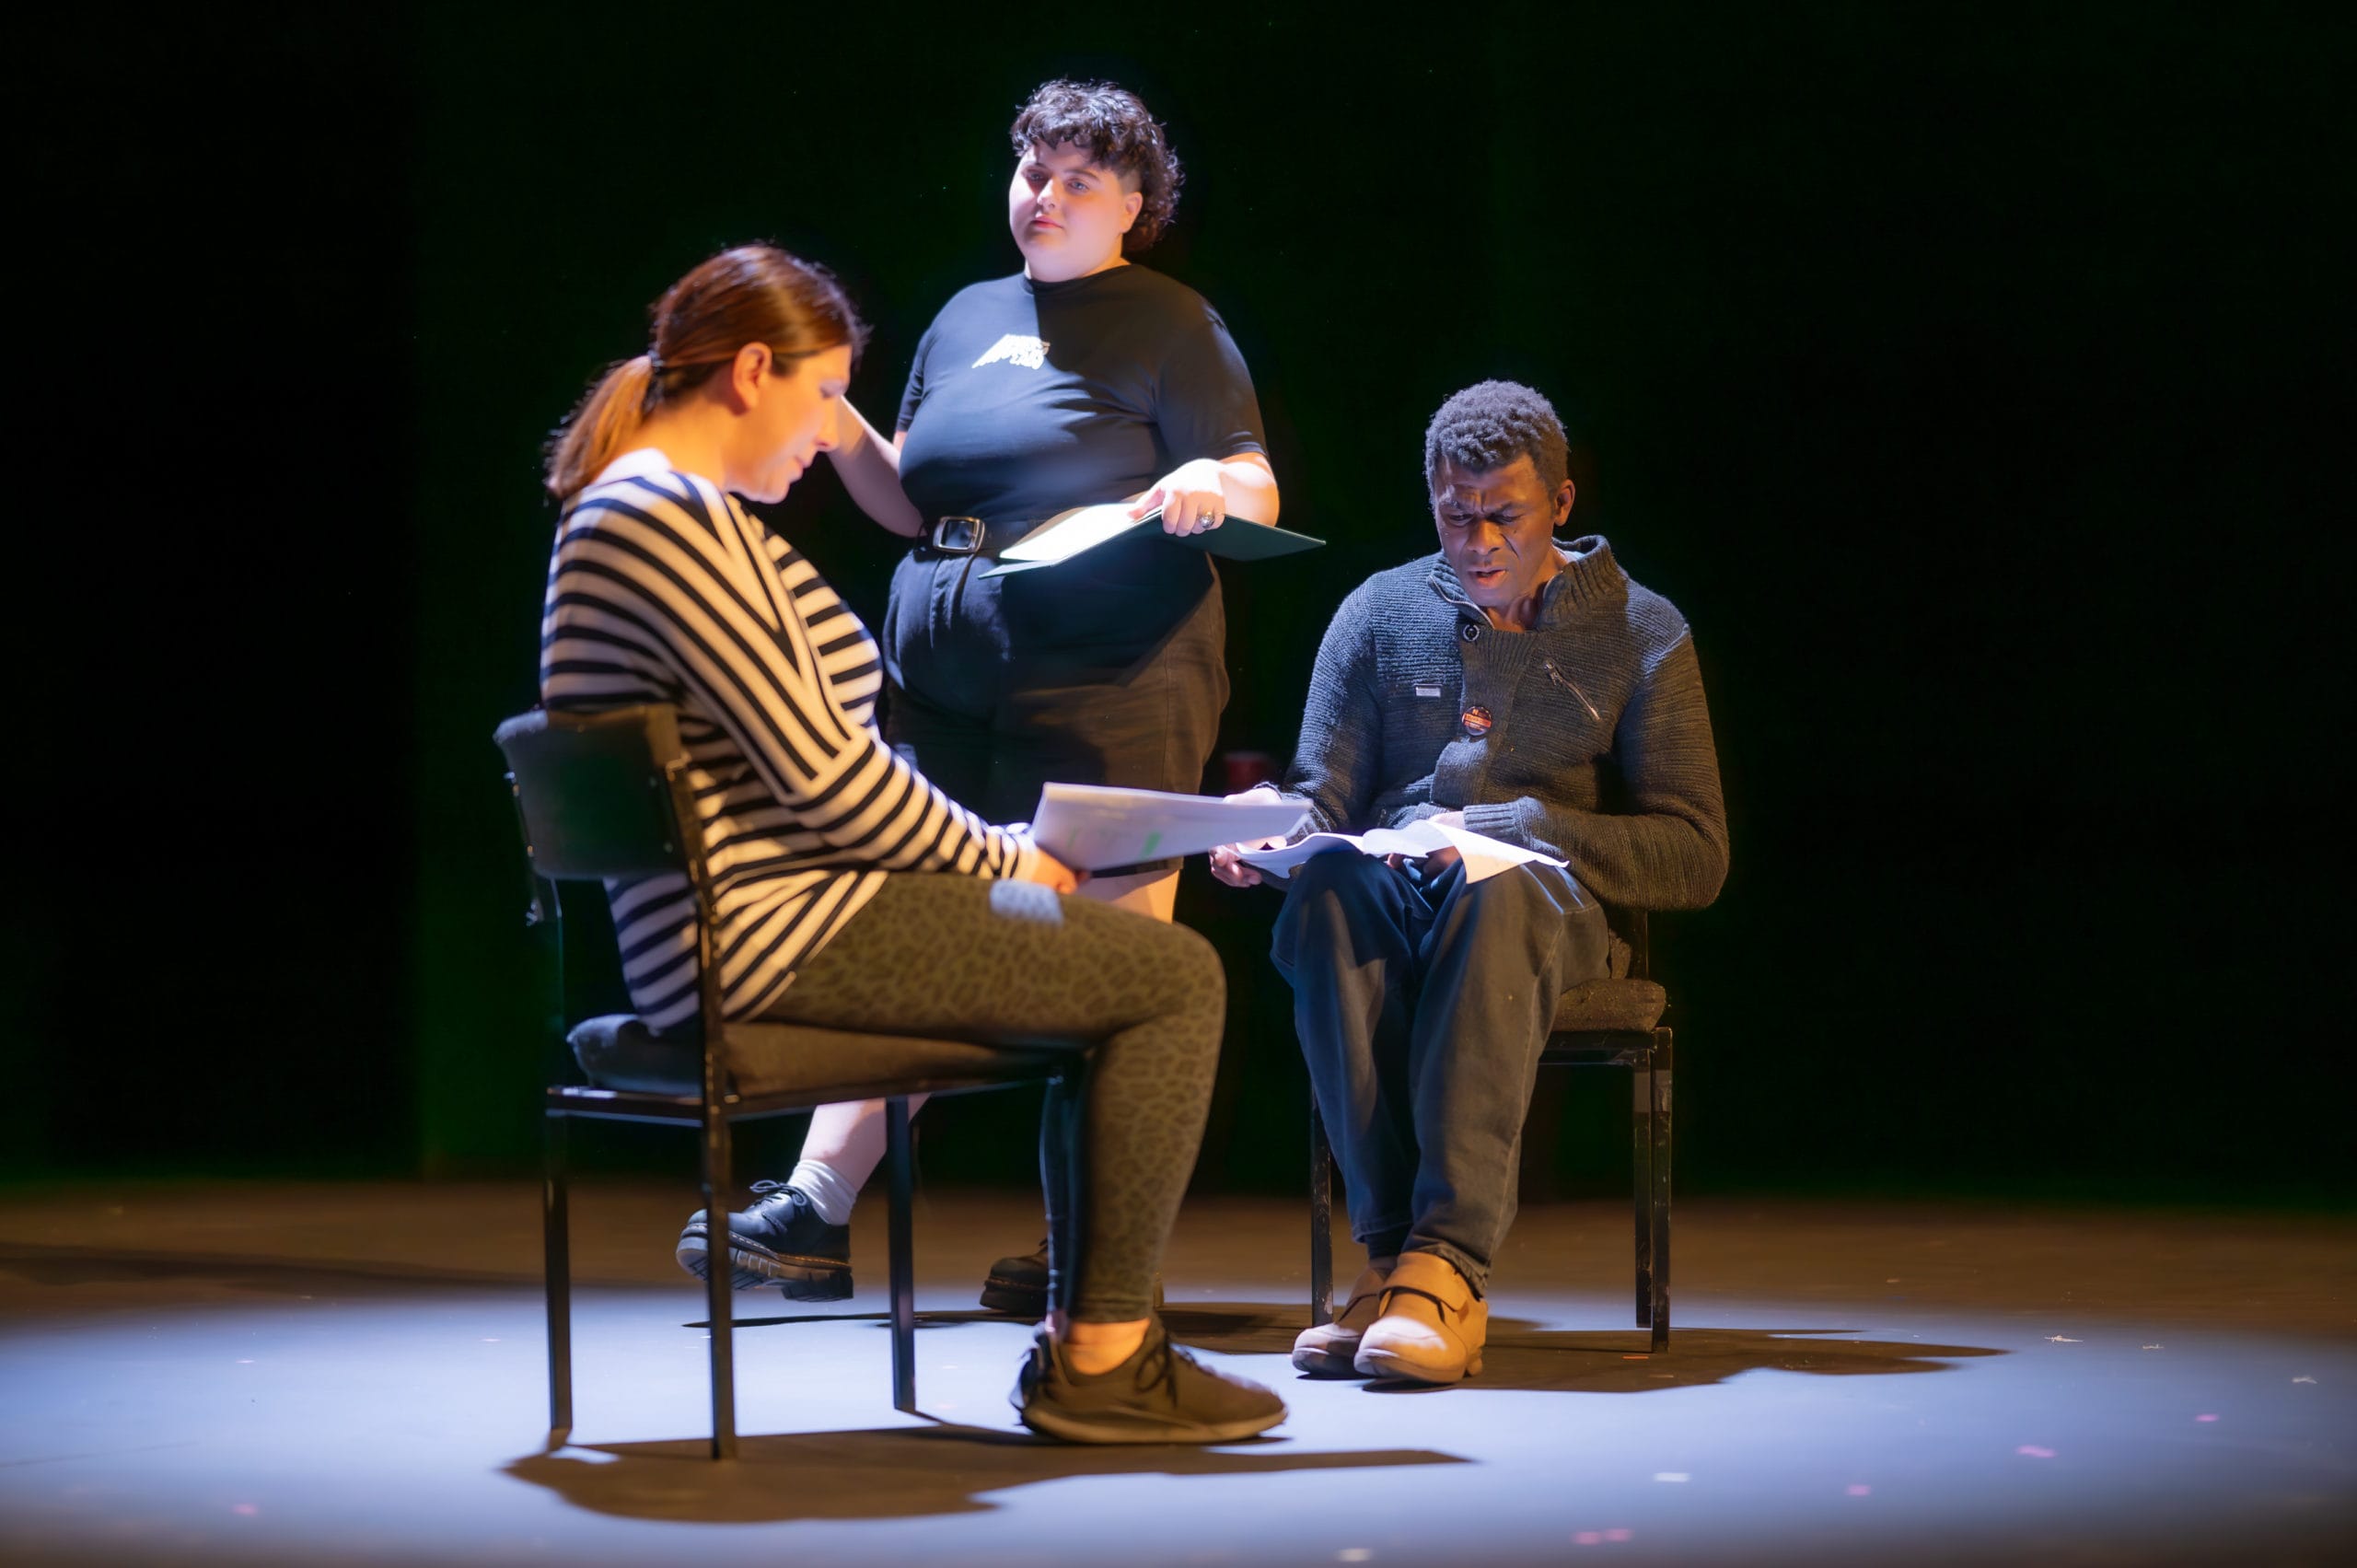 Three performers on stage. Two are sitting in chairs facing each other, and the third is walking behind them. They are all holding scripts.